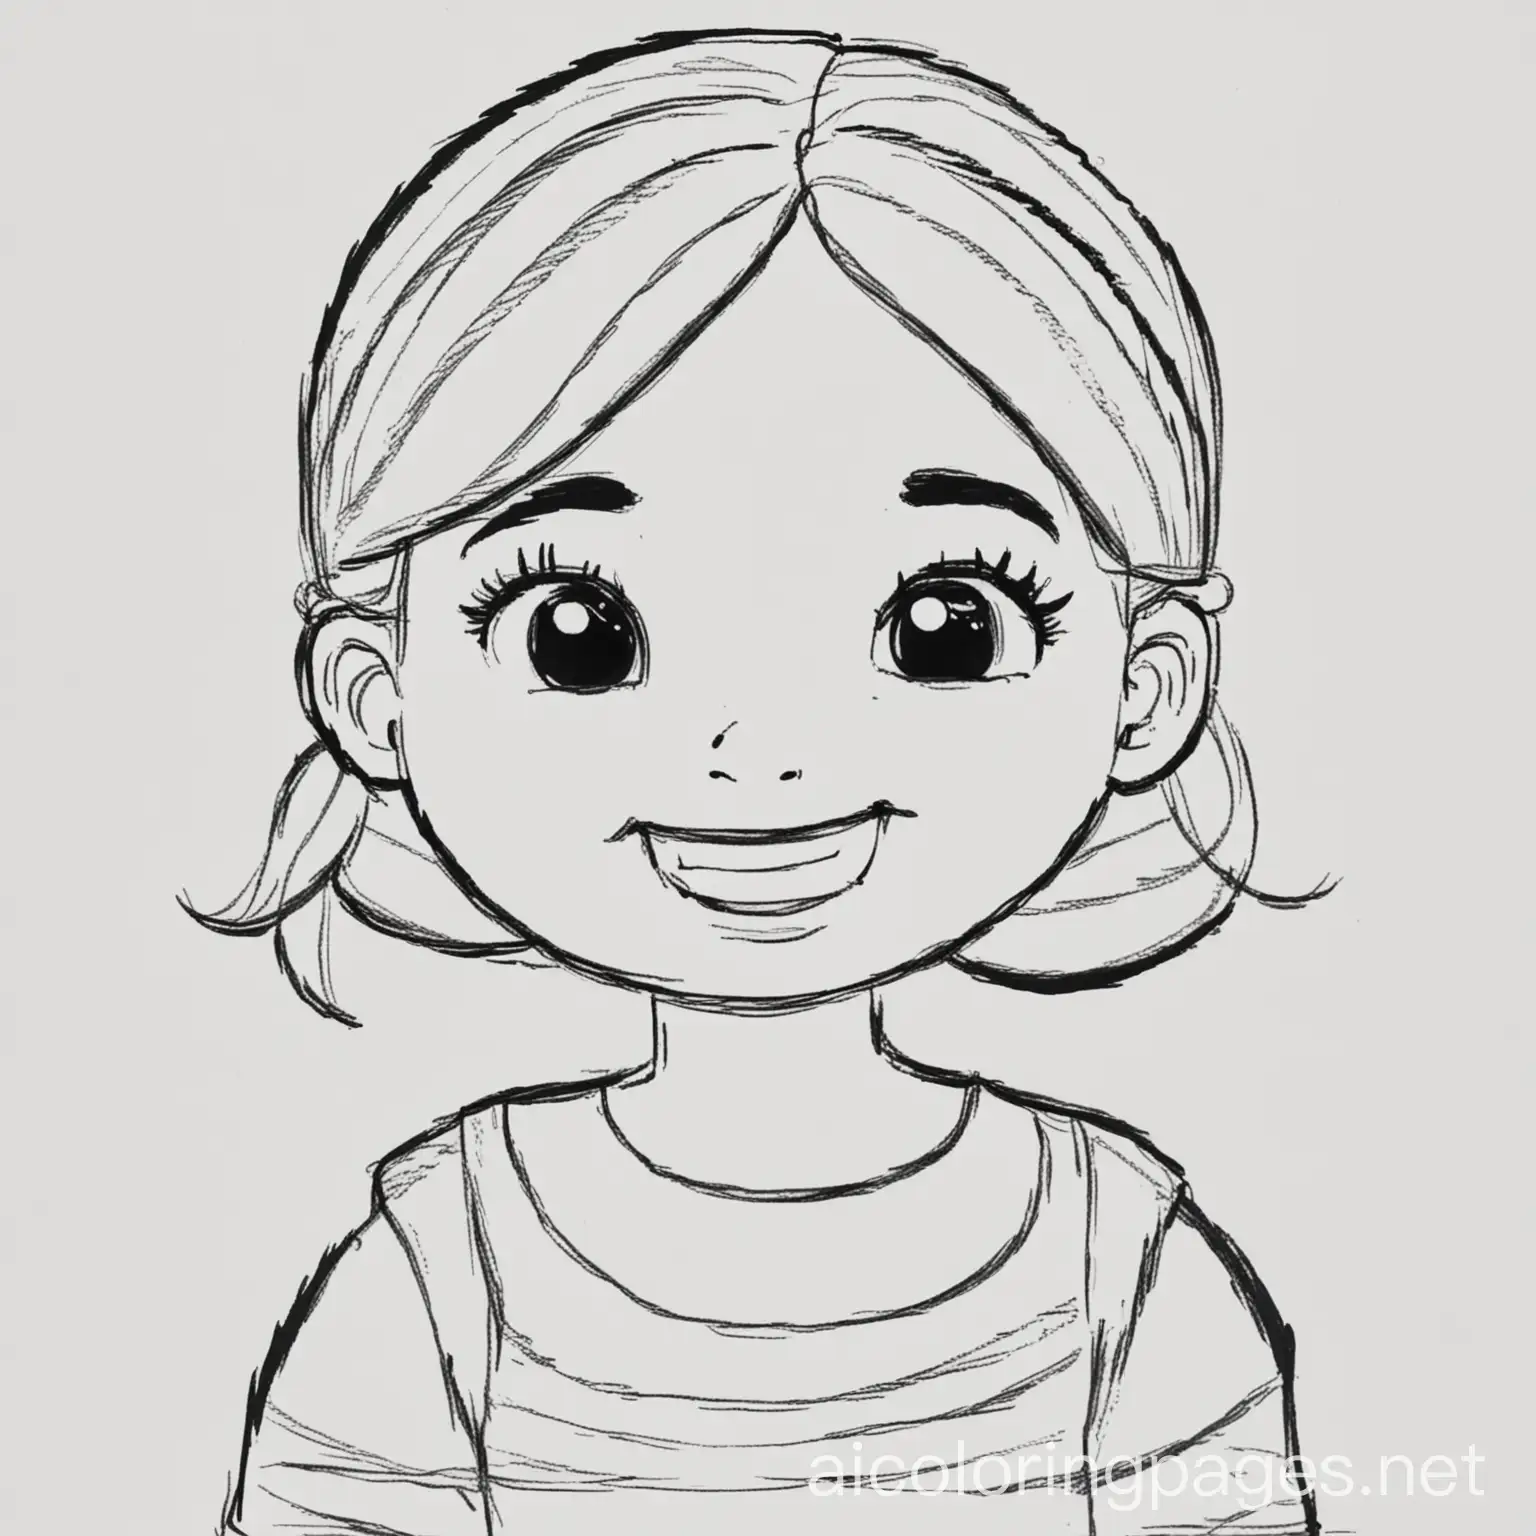 Coloring-Page-of-a-Happy-Little-Girl-Black-and-White-Line-Art